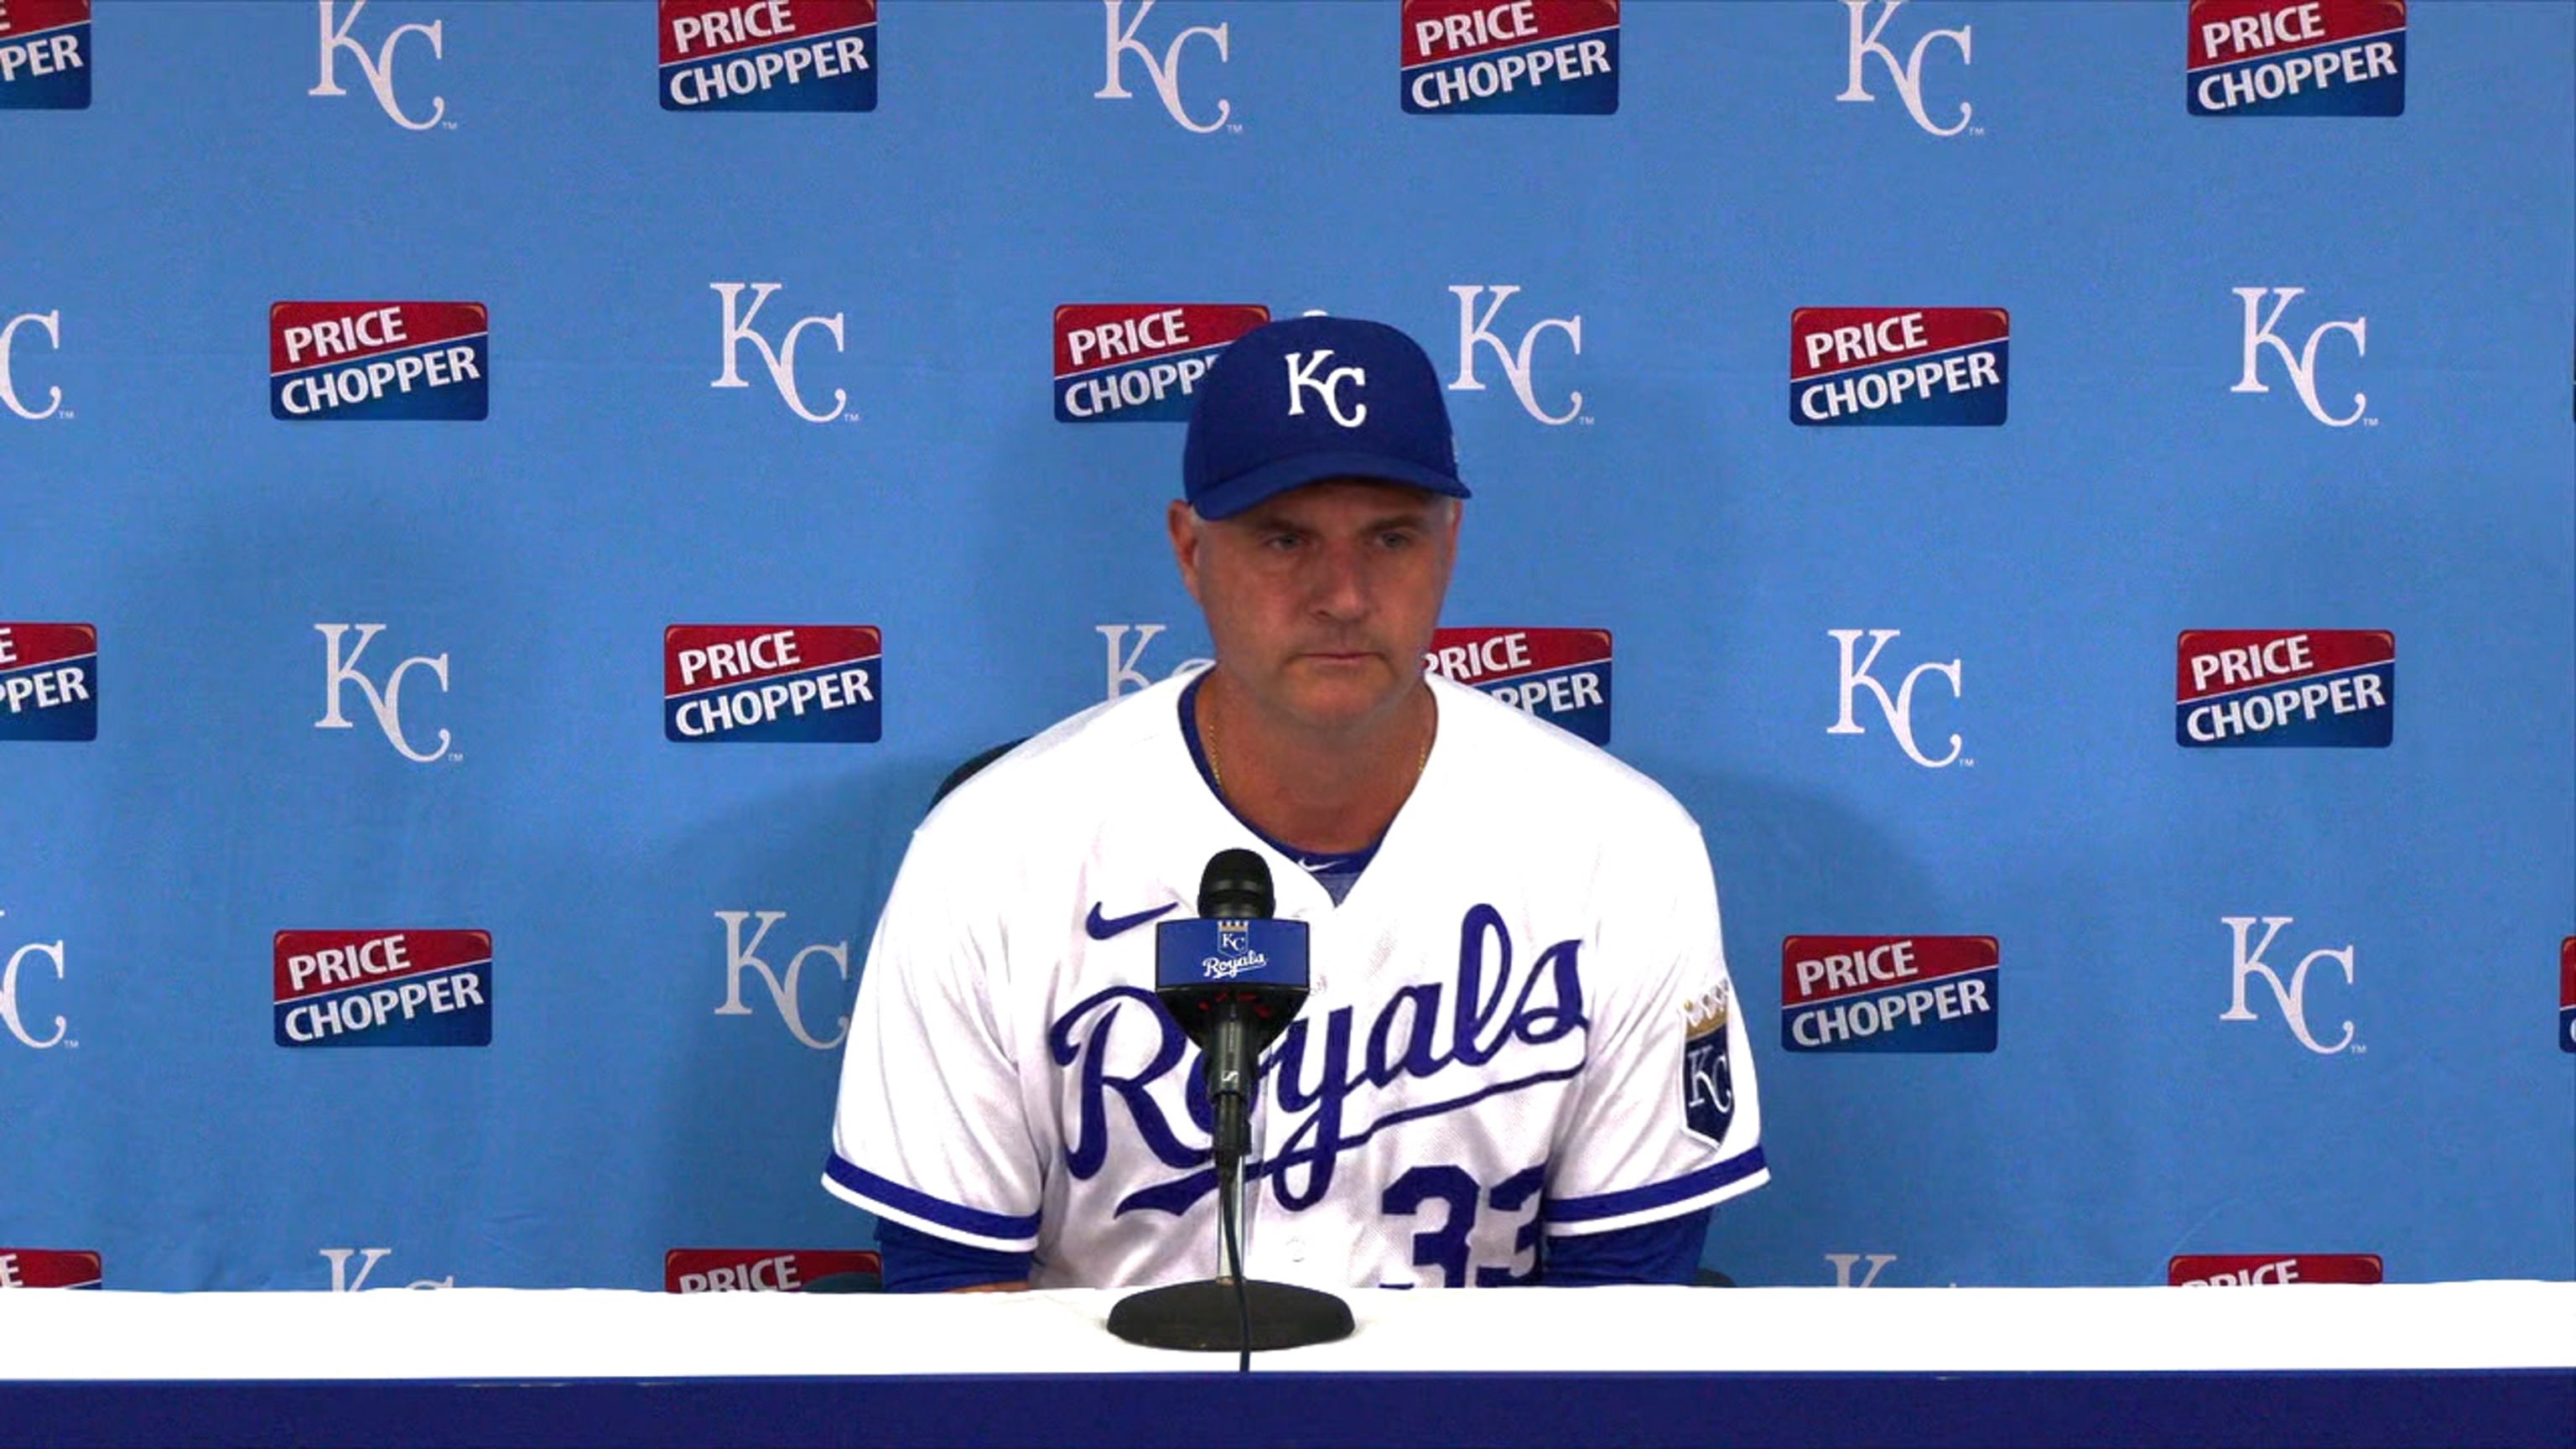 Quatraro on becoming Royals manager: 'It's a little surreal